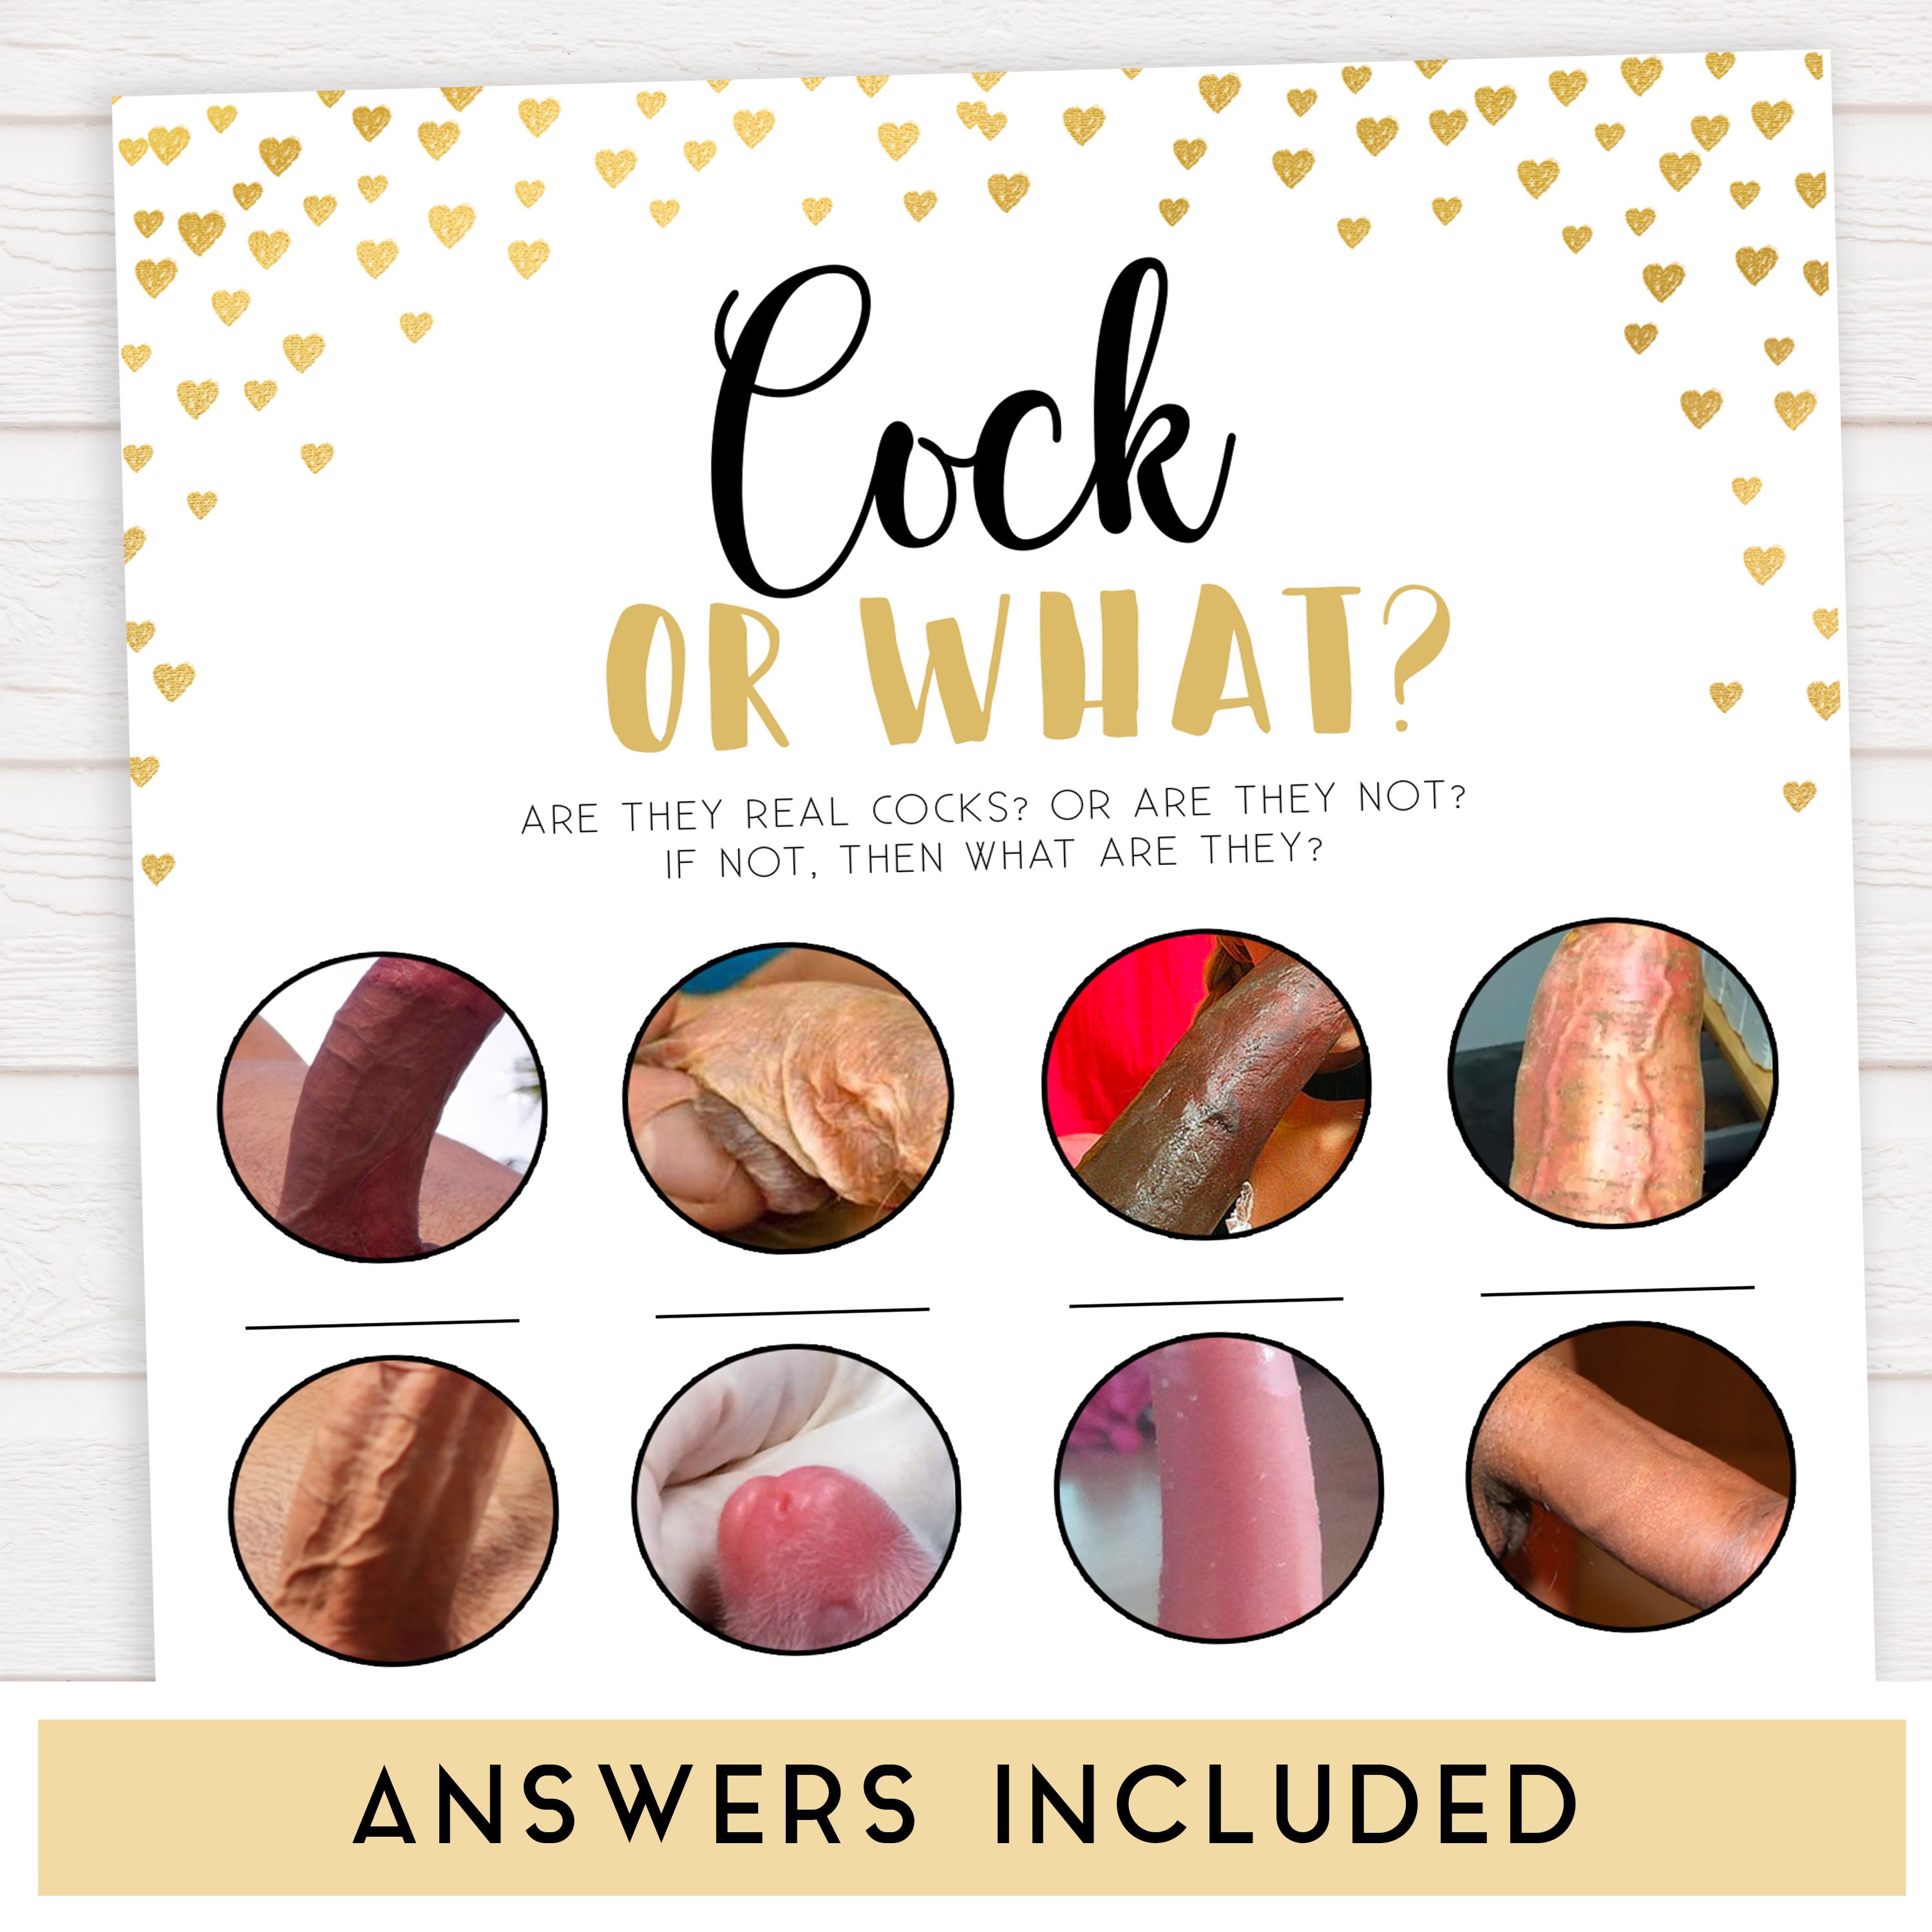 Gold hearts cock or what game, bachelorette games, bridal shower games, adult bridal games, fun bachelorette games, top bridal shower games, top bachelorette games, top 10 bridal games